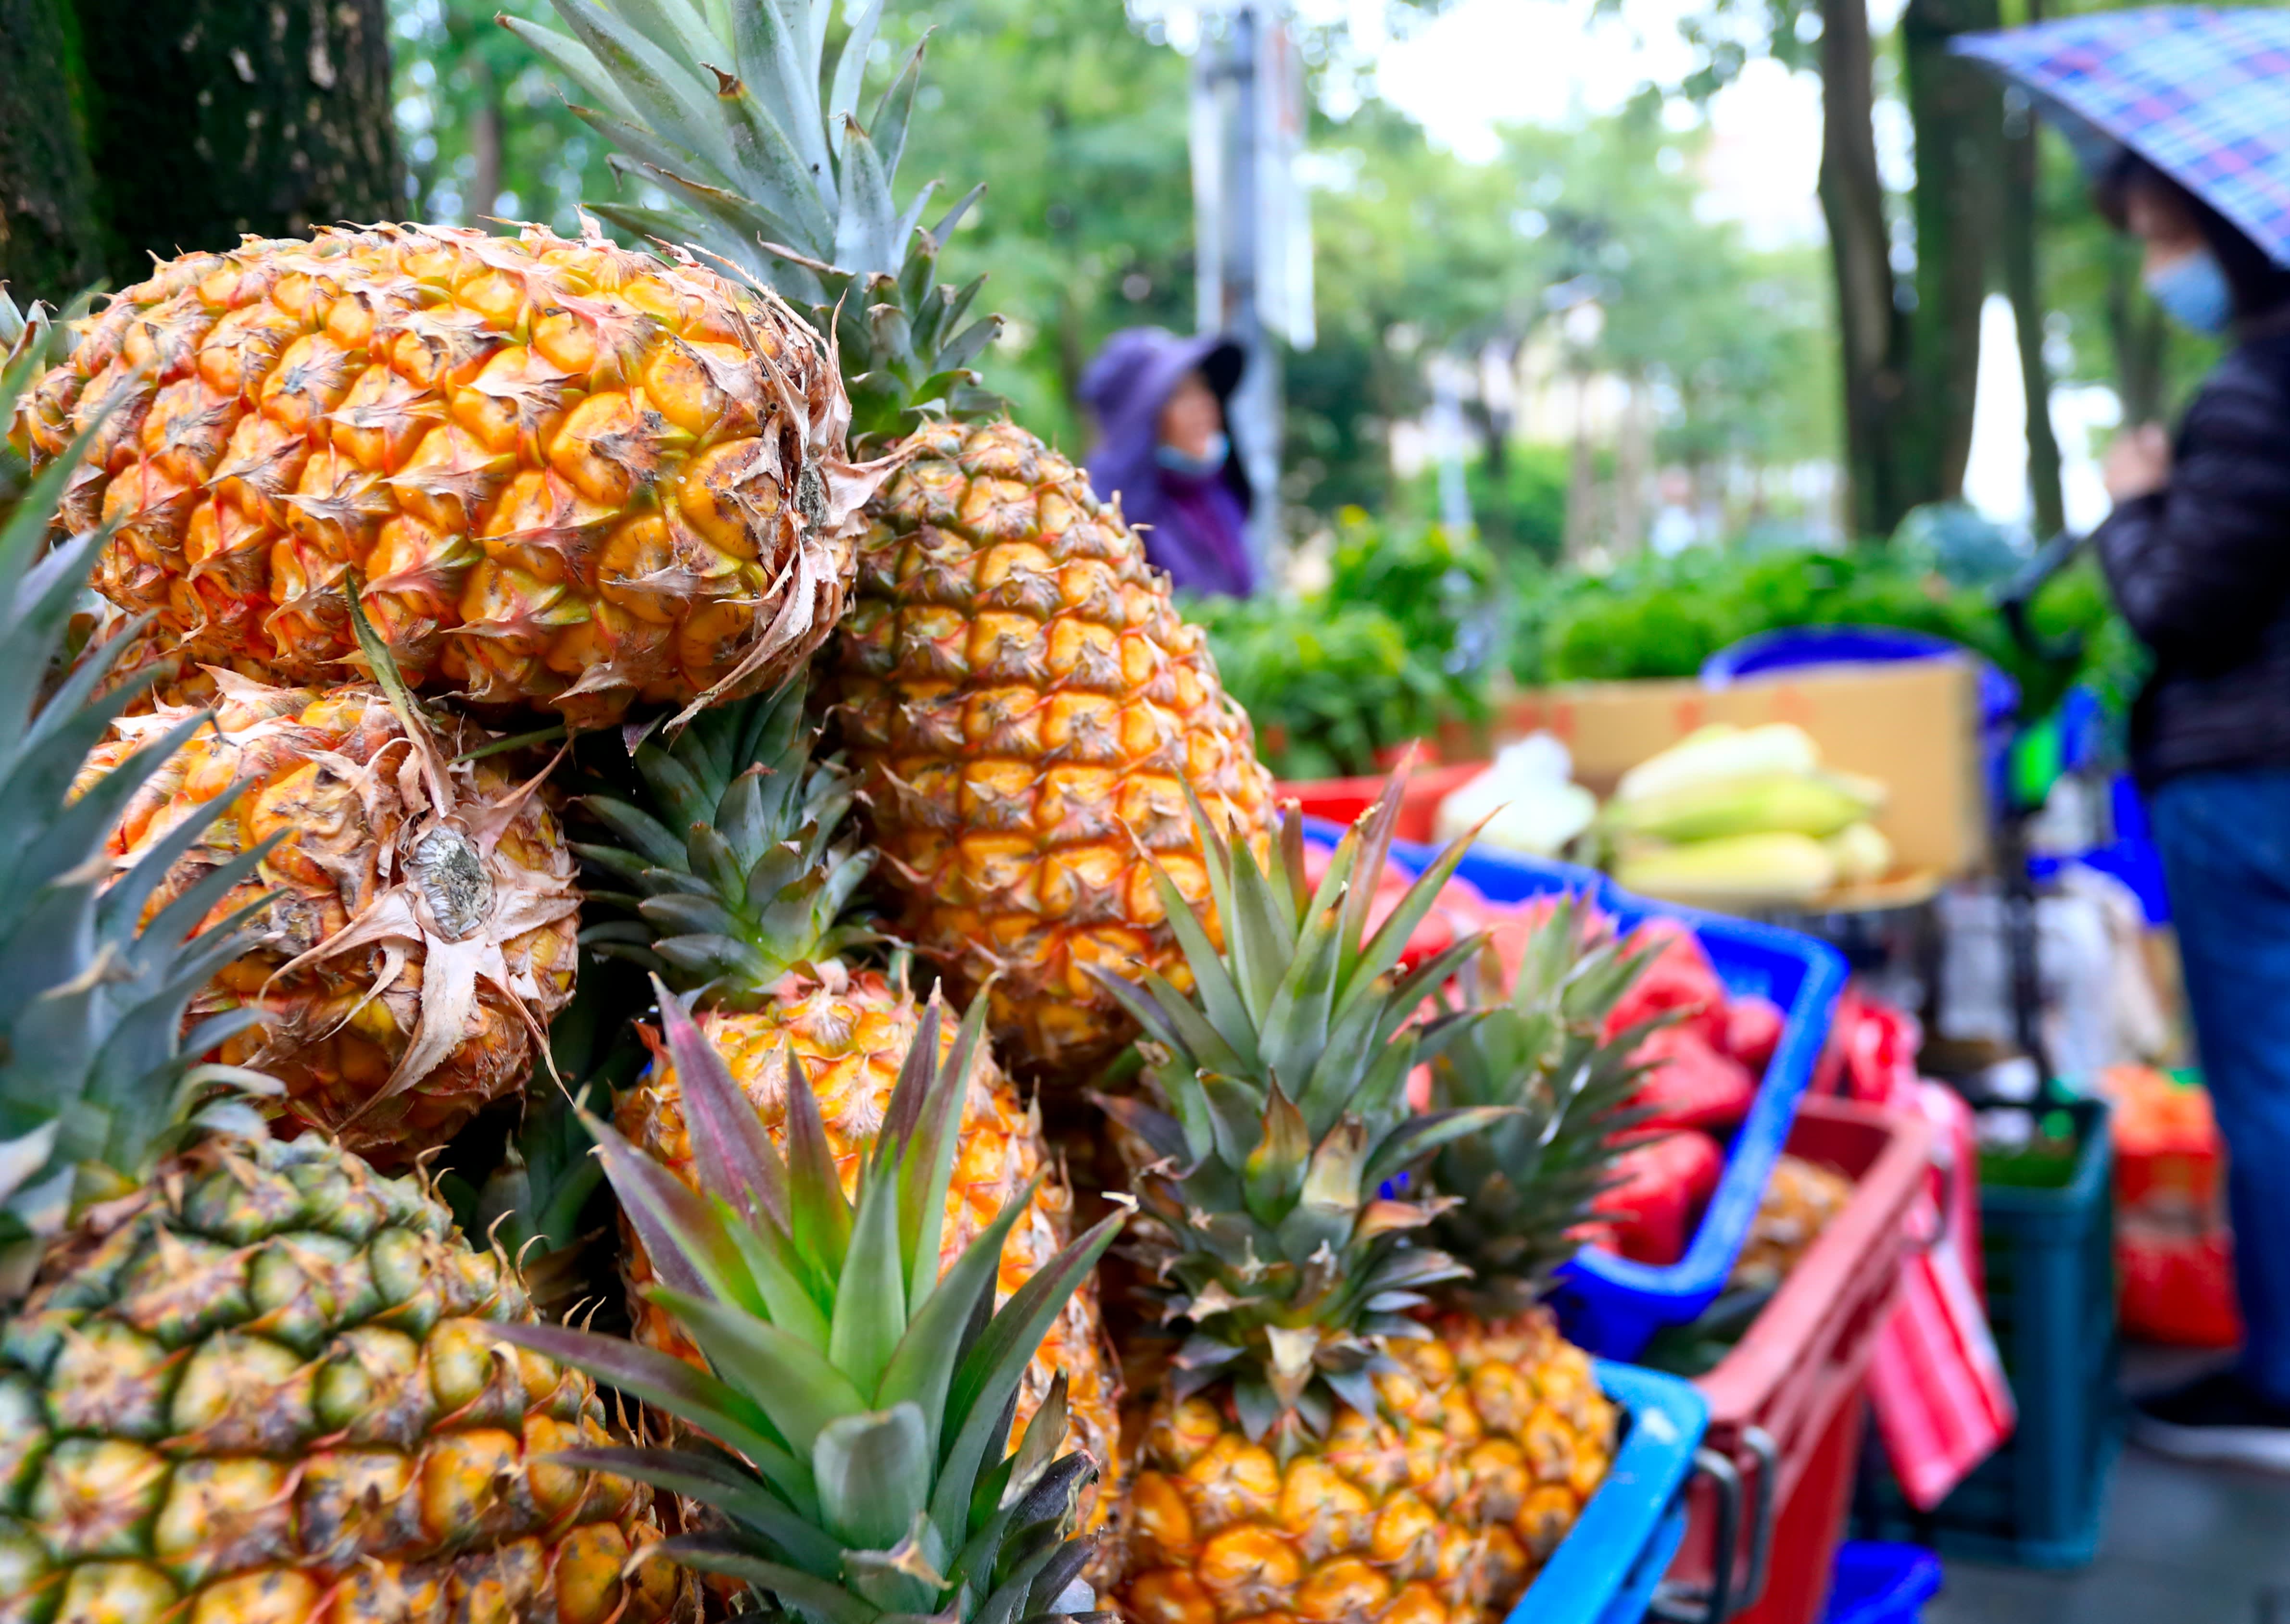 China’s ban on pineapples does not comply with world rules